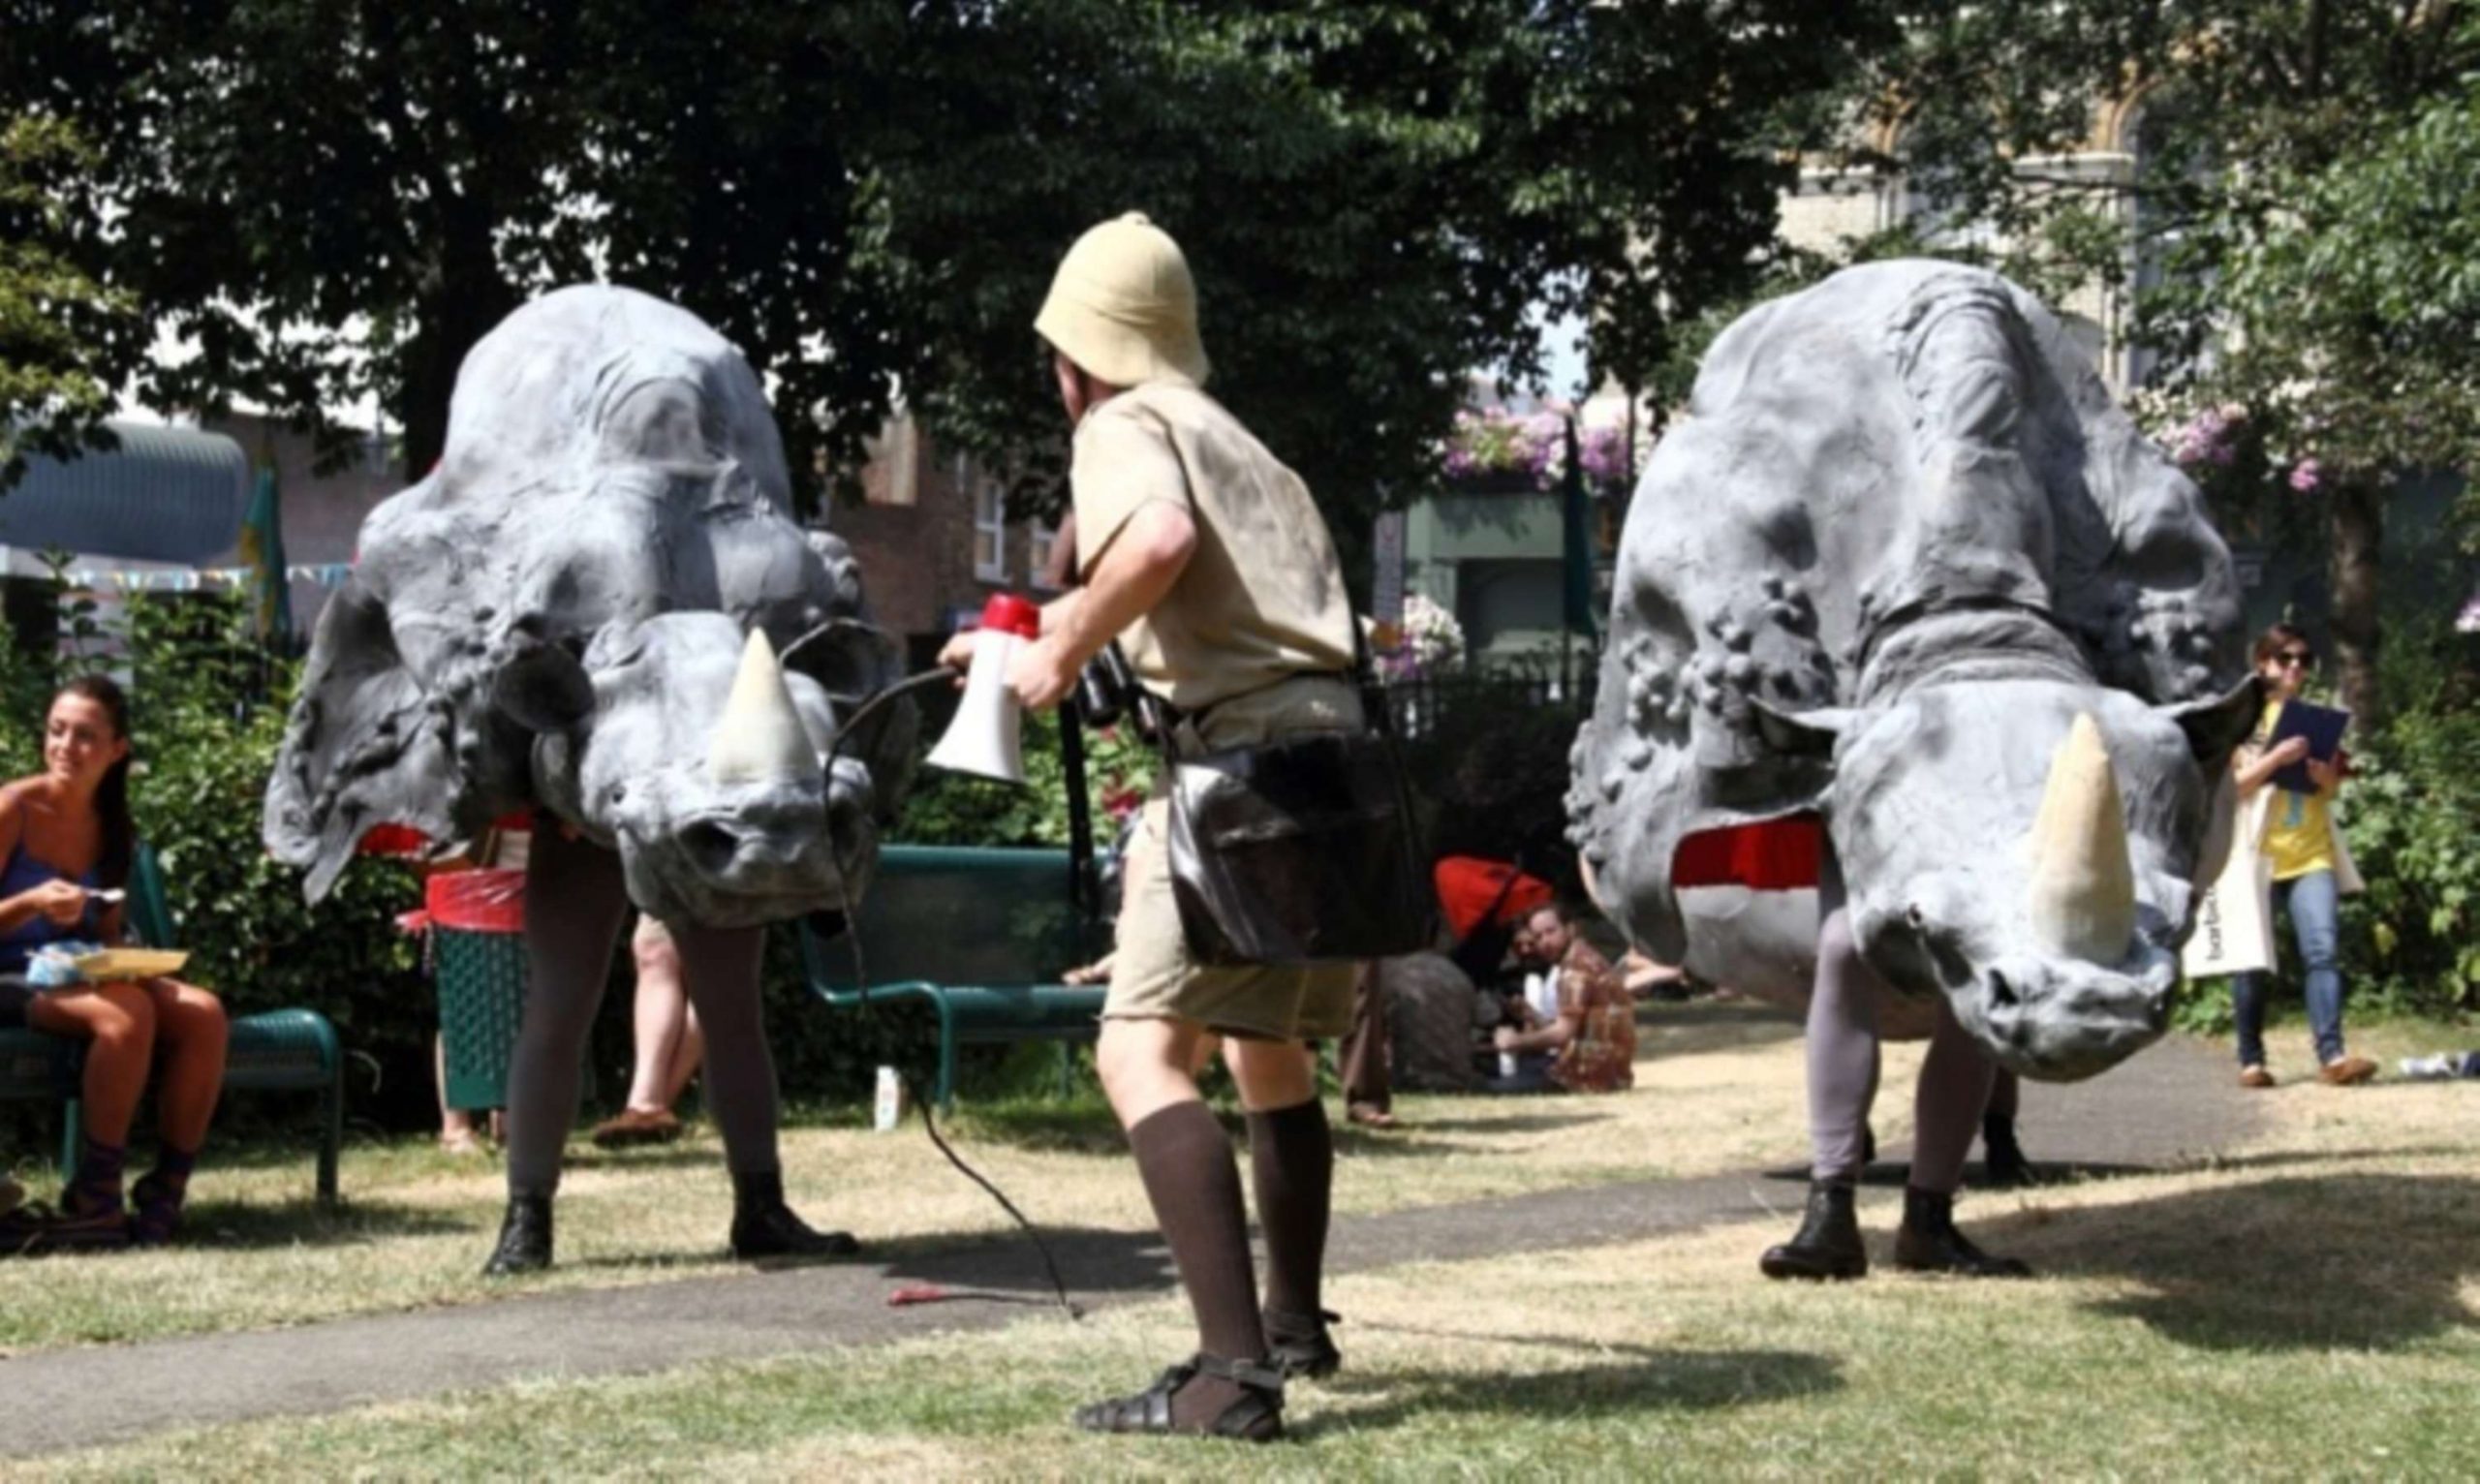 A performer dressed as a zookeeper, facing the puppets - the life-size puppets of the fronts of two rhinos face the camera.